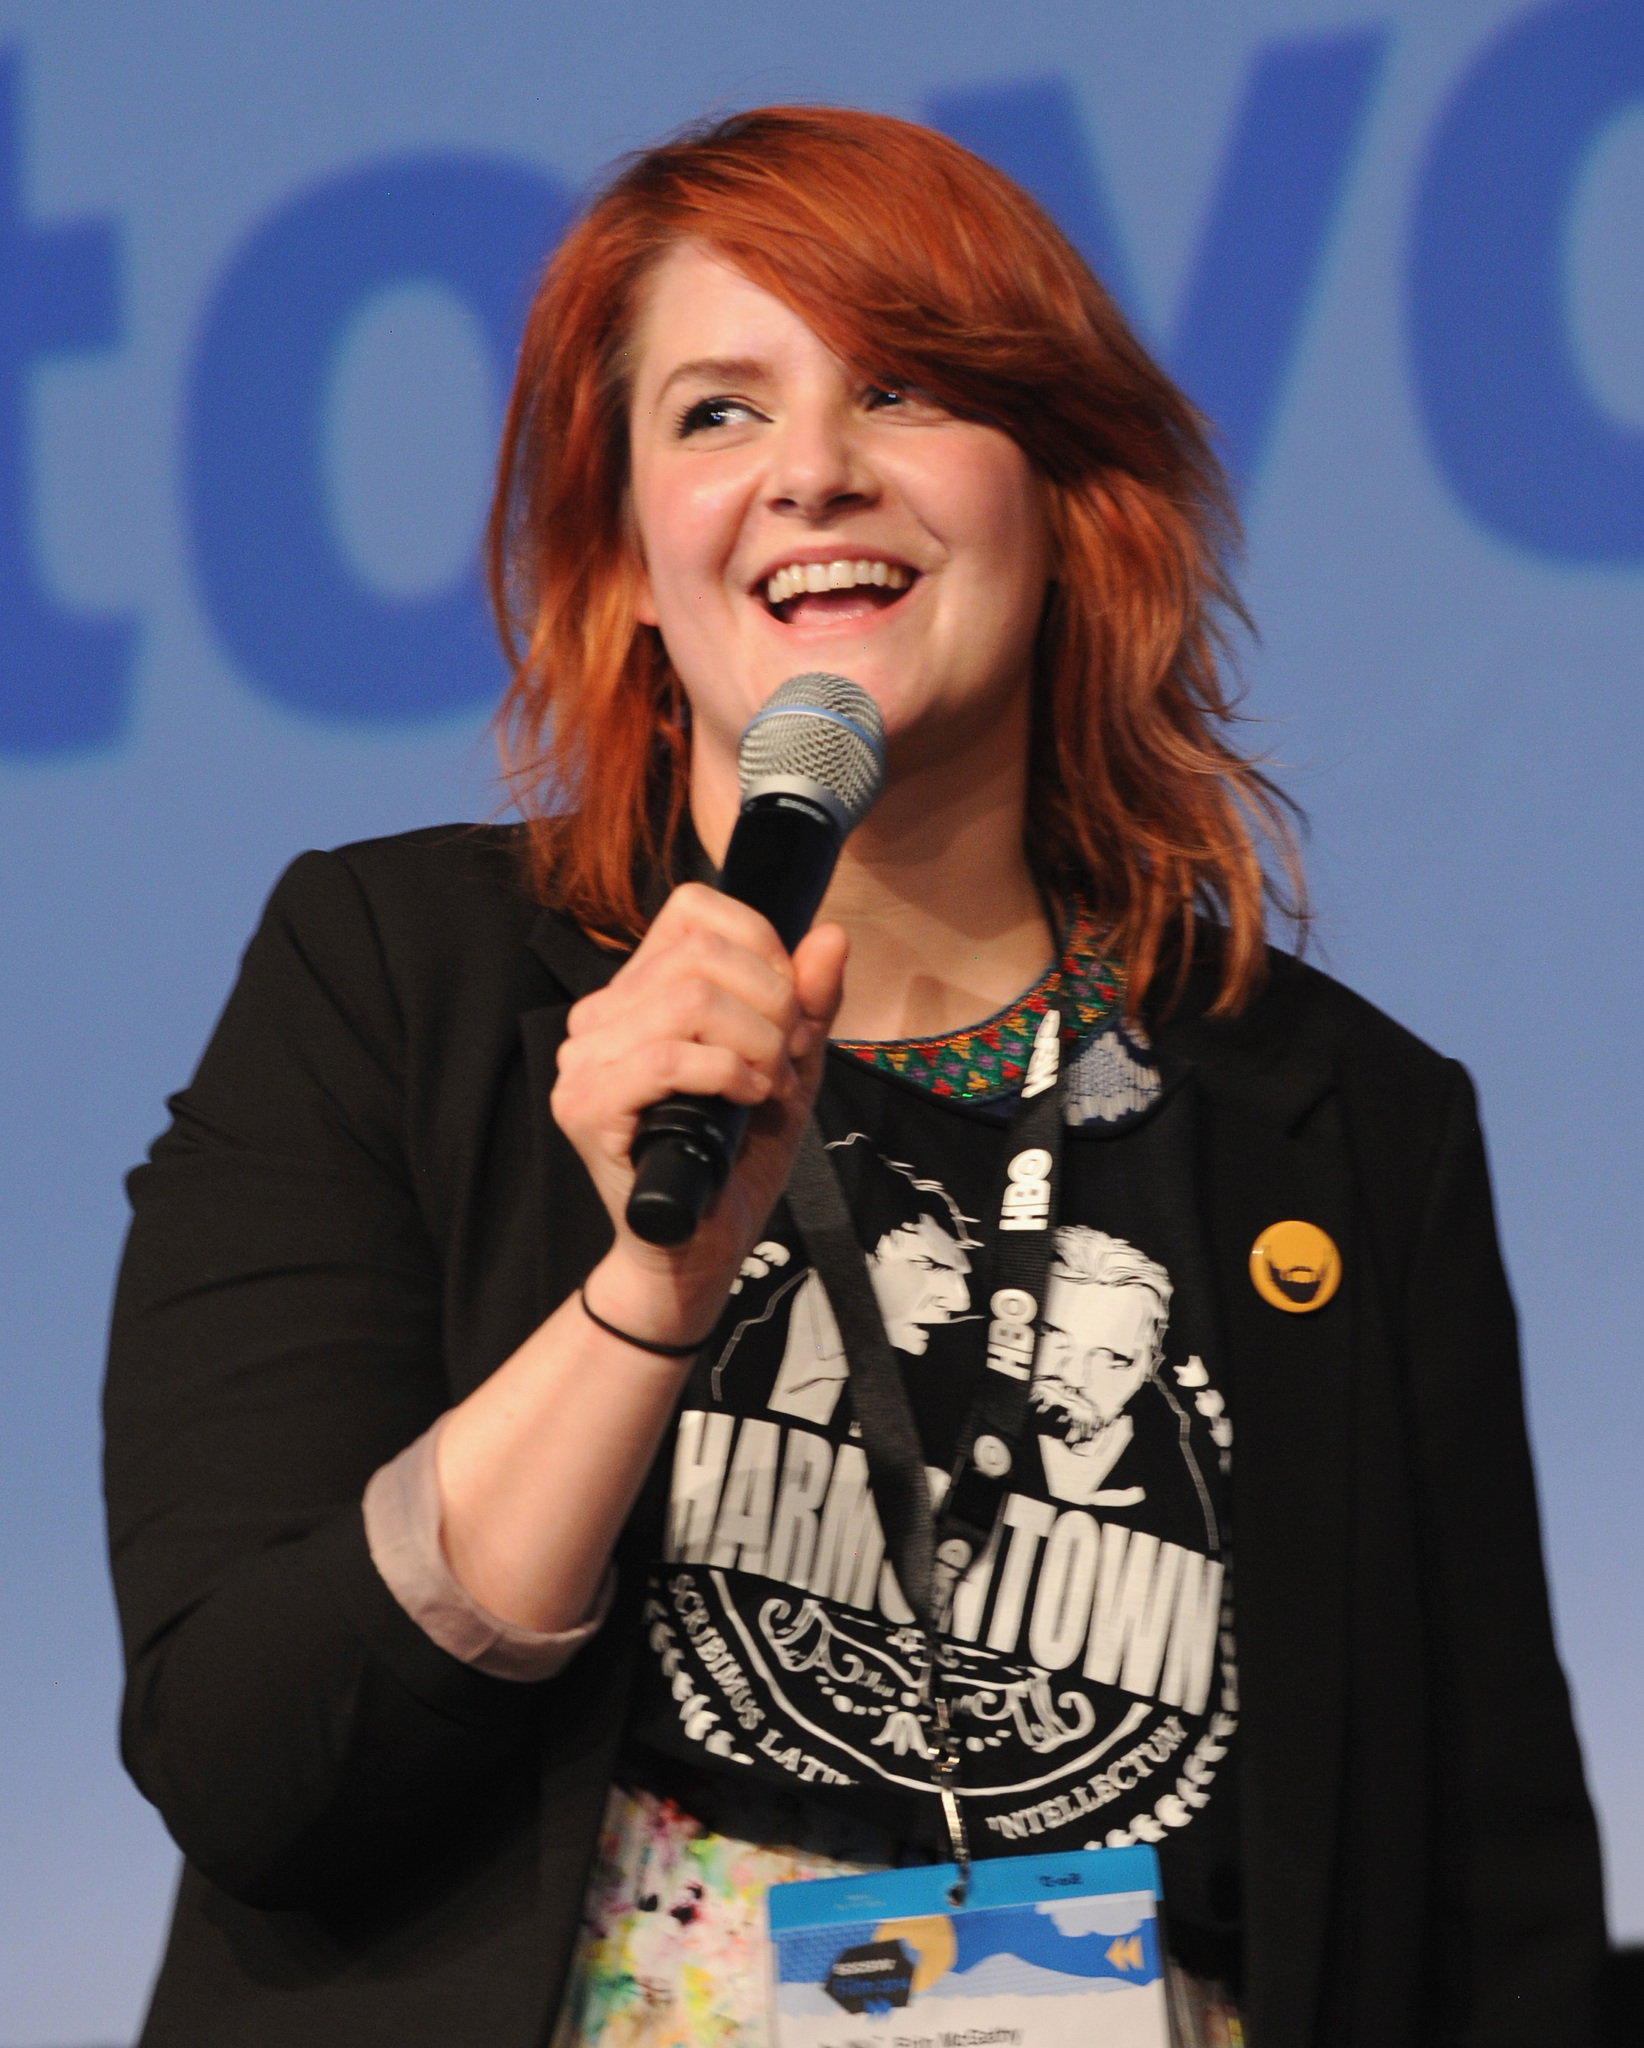 Erin McGathy at event of Harmontown (2014)